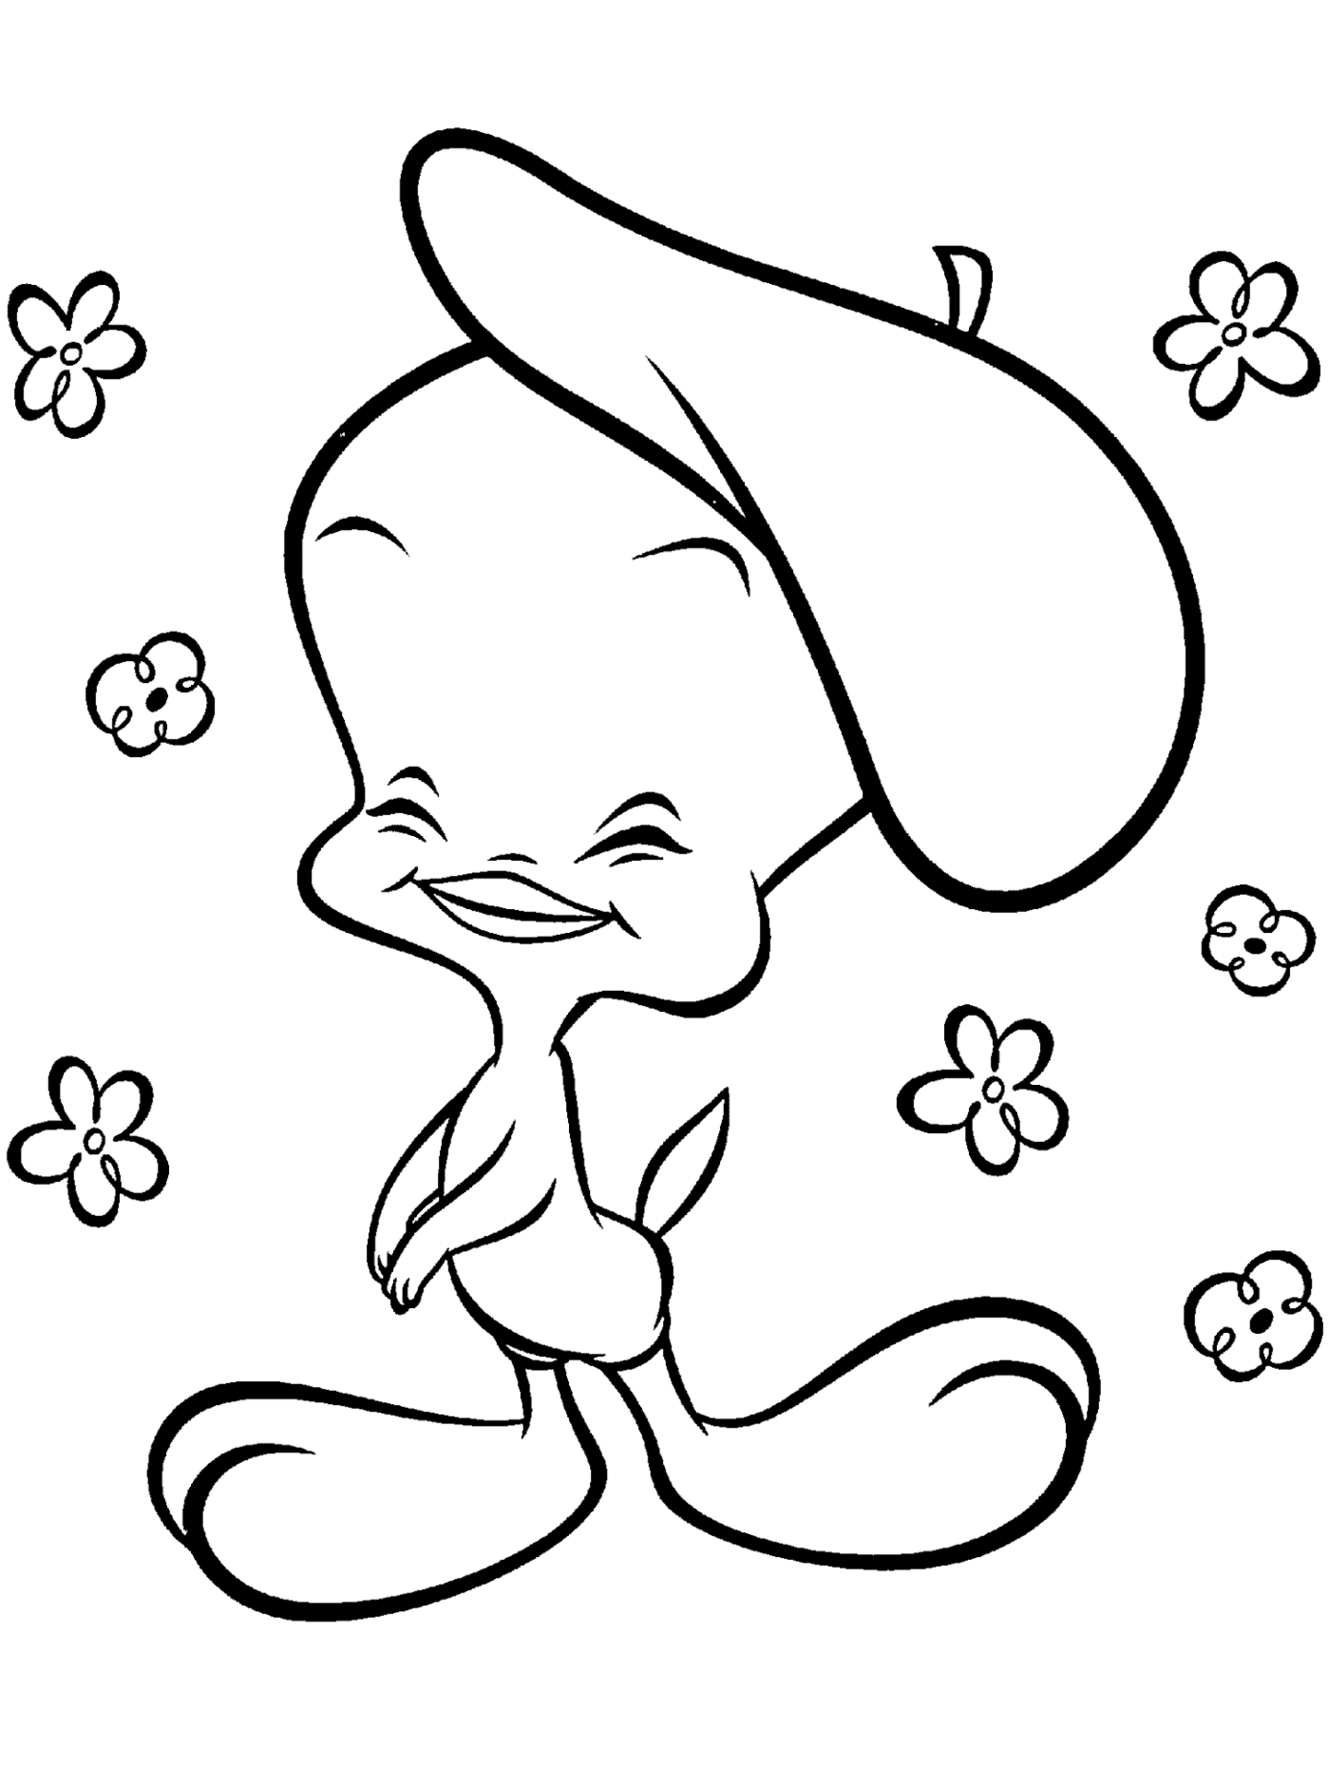 Tweety Bird Vector Black And White Clipart - Free to use Clip Art